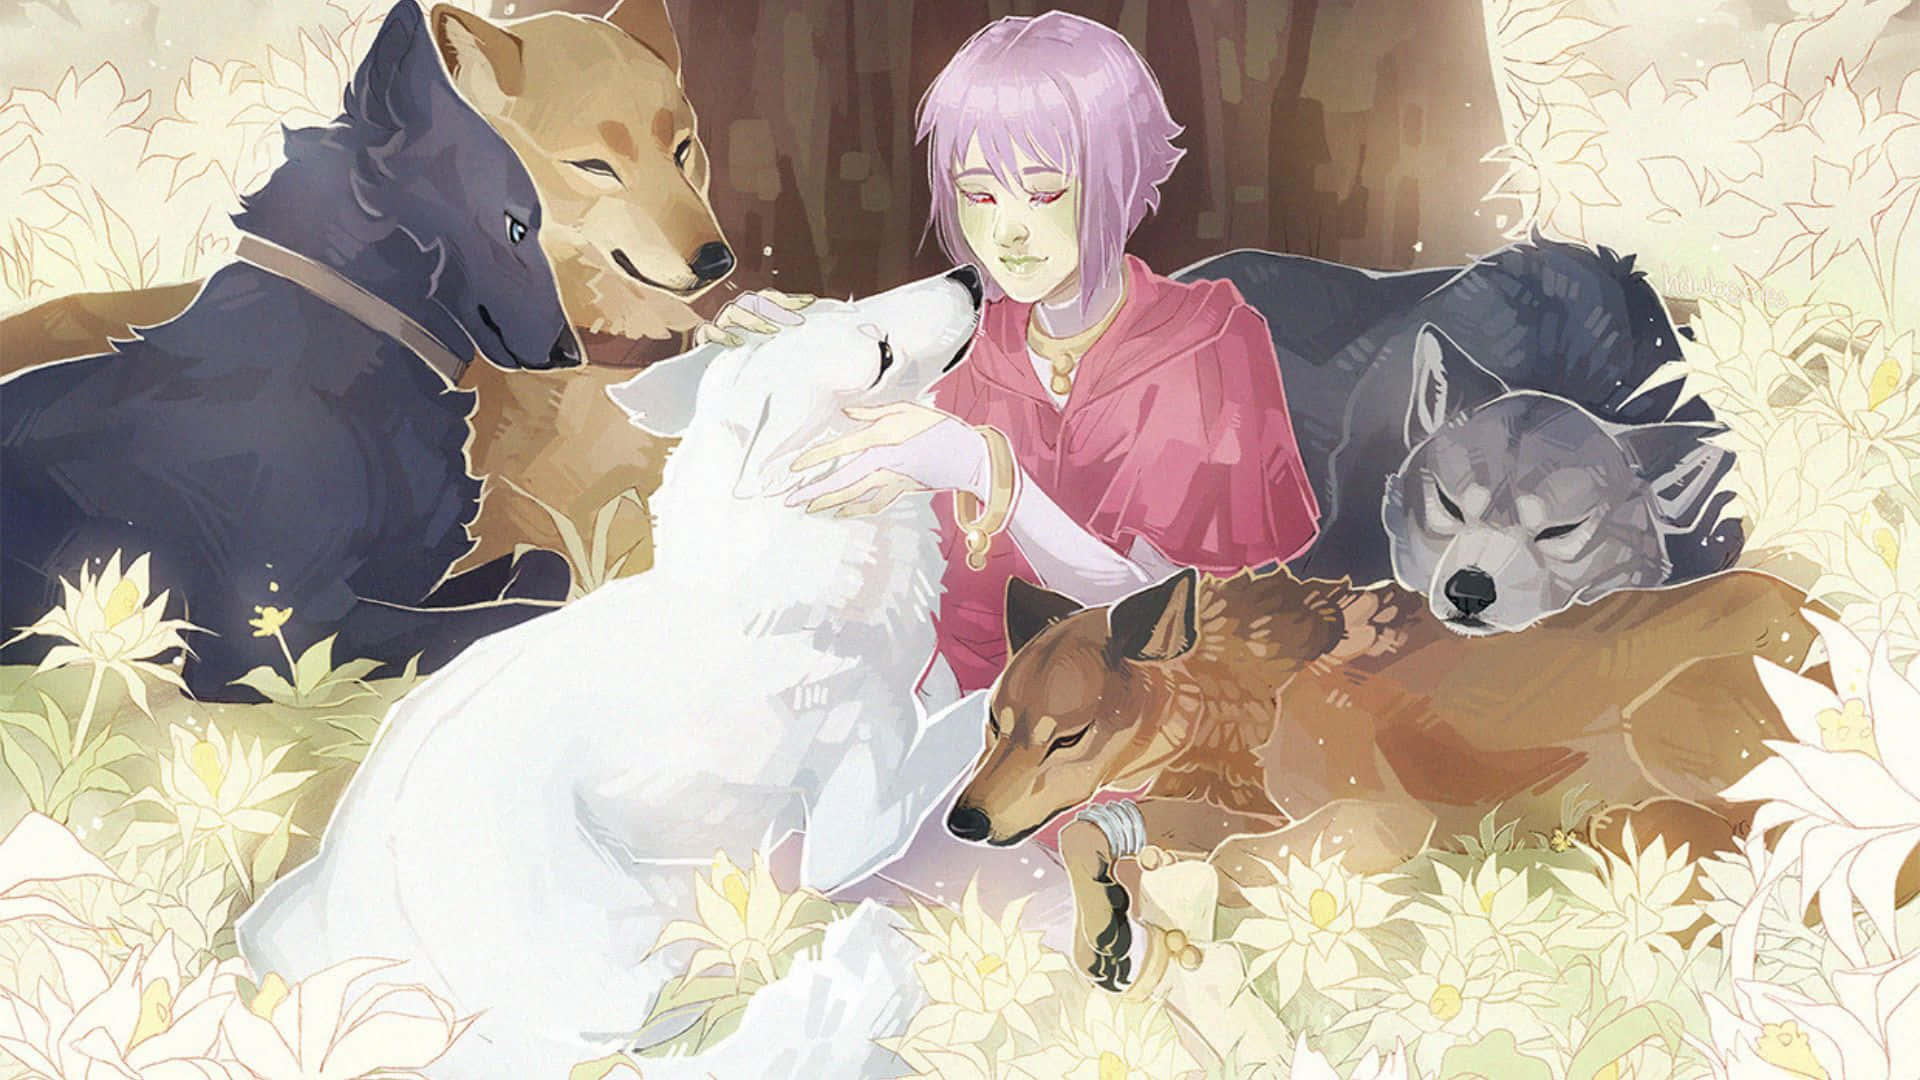 Cheza, the enigmatic Flower Maiden, glowing under the moonlight in the captivating world of Wolf's Rain. Wallpaper